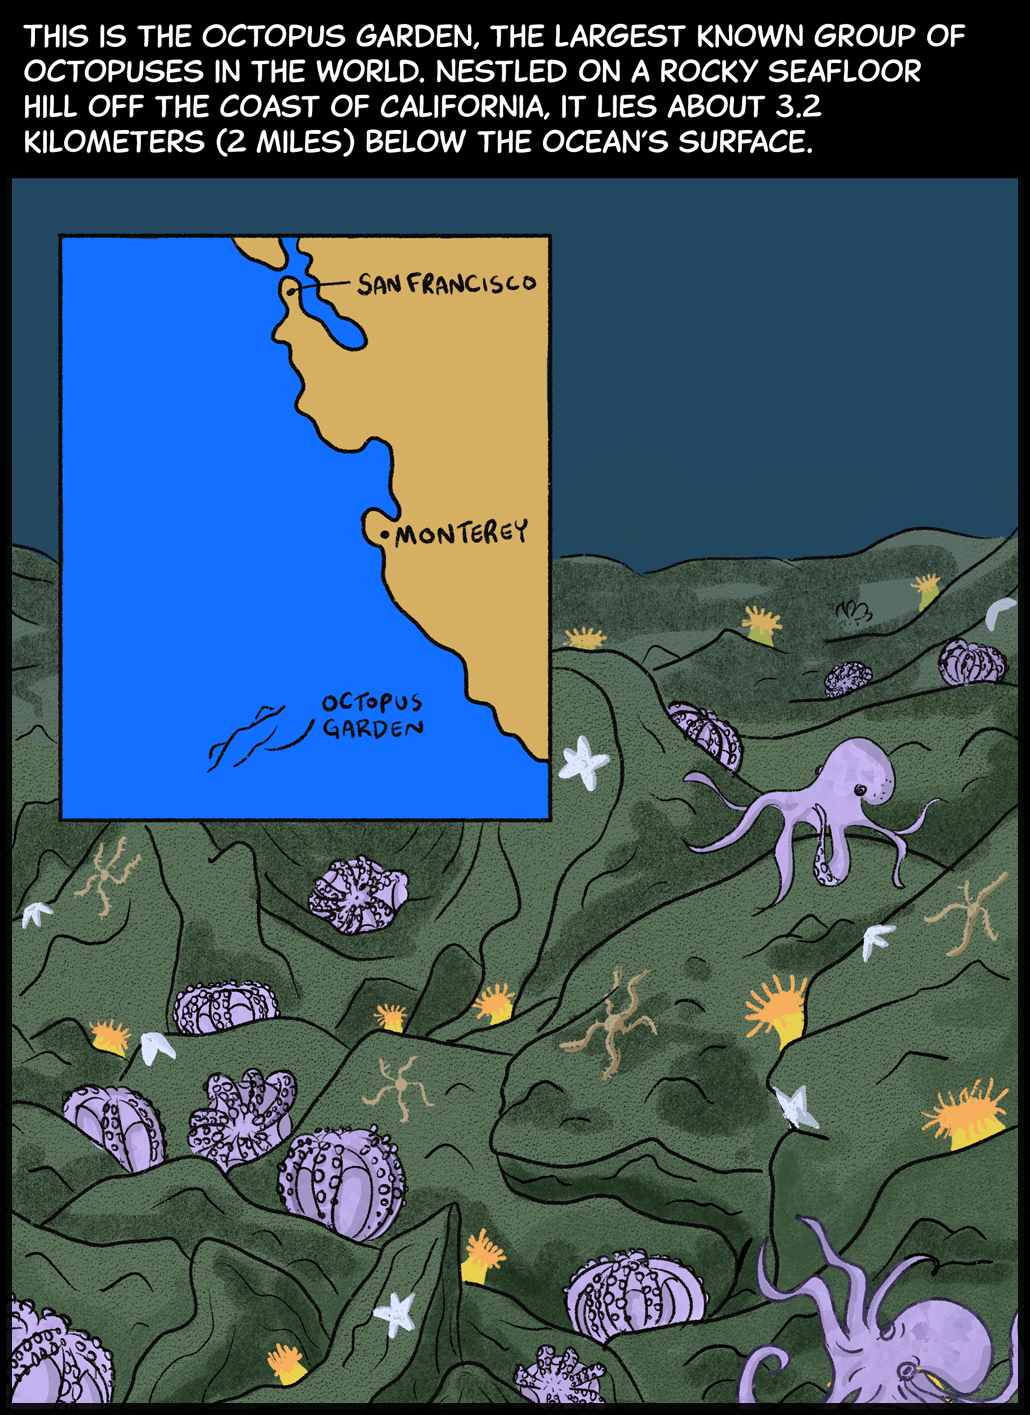 Text (above image): This is the Octopus Garden, the largest known group of octopuses in the world. Nestled on a rocky seafloor hill off the coast of California, it lies about 3.2 kilometers (2 miles) below the ocean’s surface. Image: Purple octopuses, both upright and upside-down with their arms wrapped around their bodies, are scattered across a rocky, bumpy stretch of seafloor. The seafloor is also spotted with yellow anemones, orange sea stars and other critters. Inset: A map shows the location of the Octopus Garden off the coast of California, south of San Francisco and Monterey.